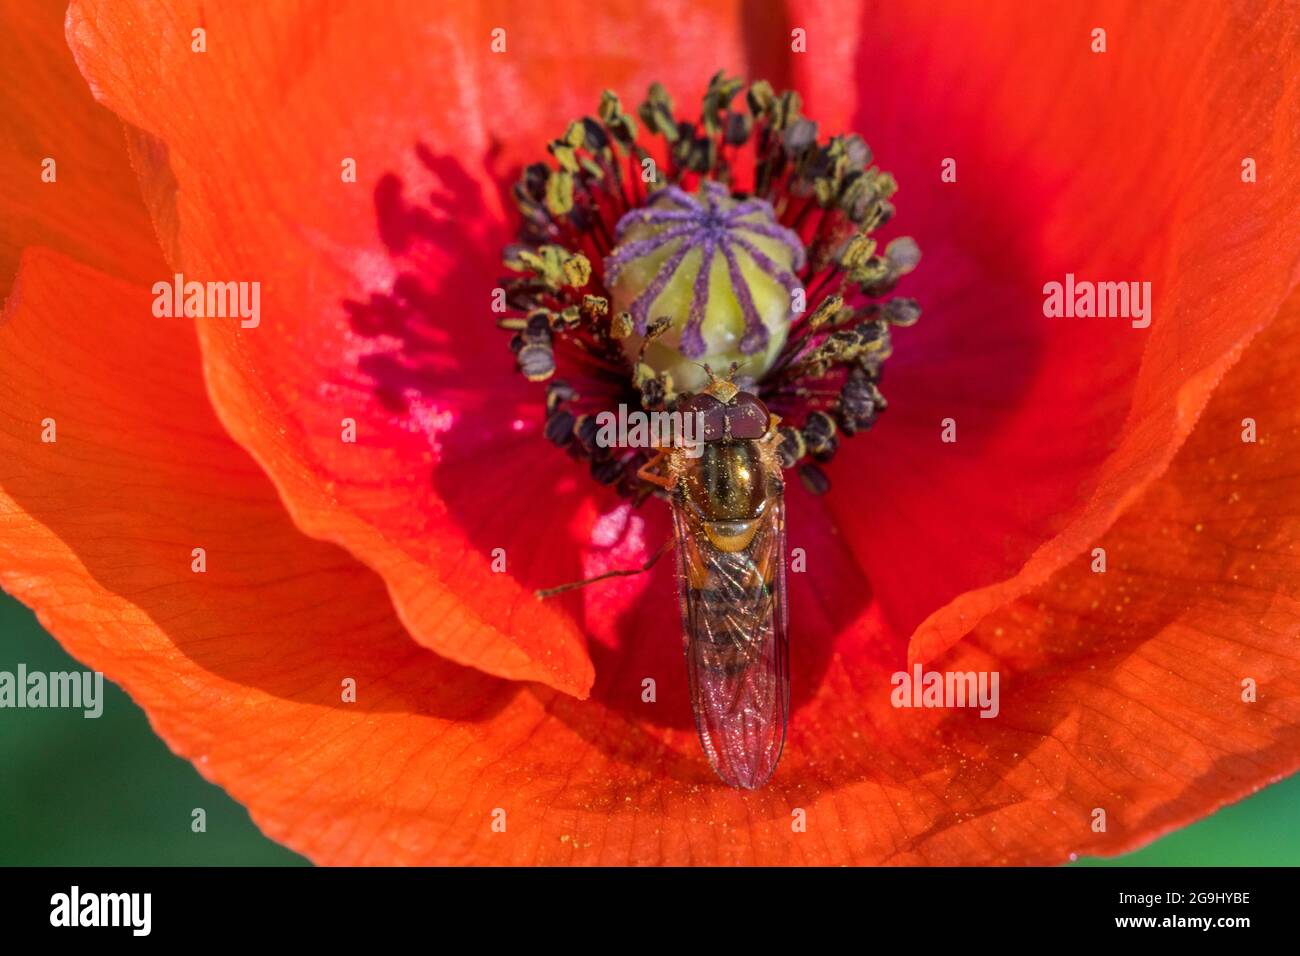 Marmalade hoverfly (Episyrphus balteatus) collecting pollen and nectar from common poppy / red field poppy / Flanders poppy (Papaver rhoeas) in summer Stock Photo